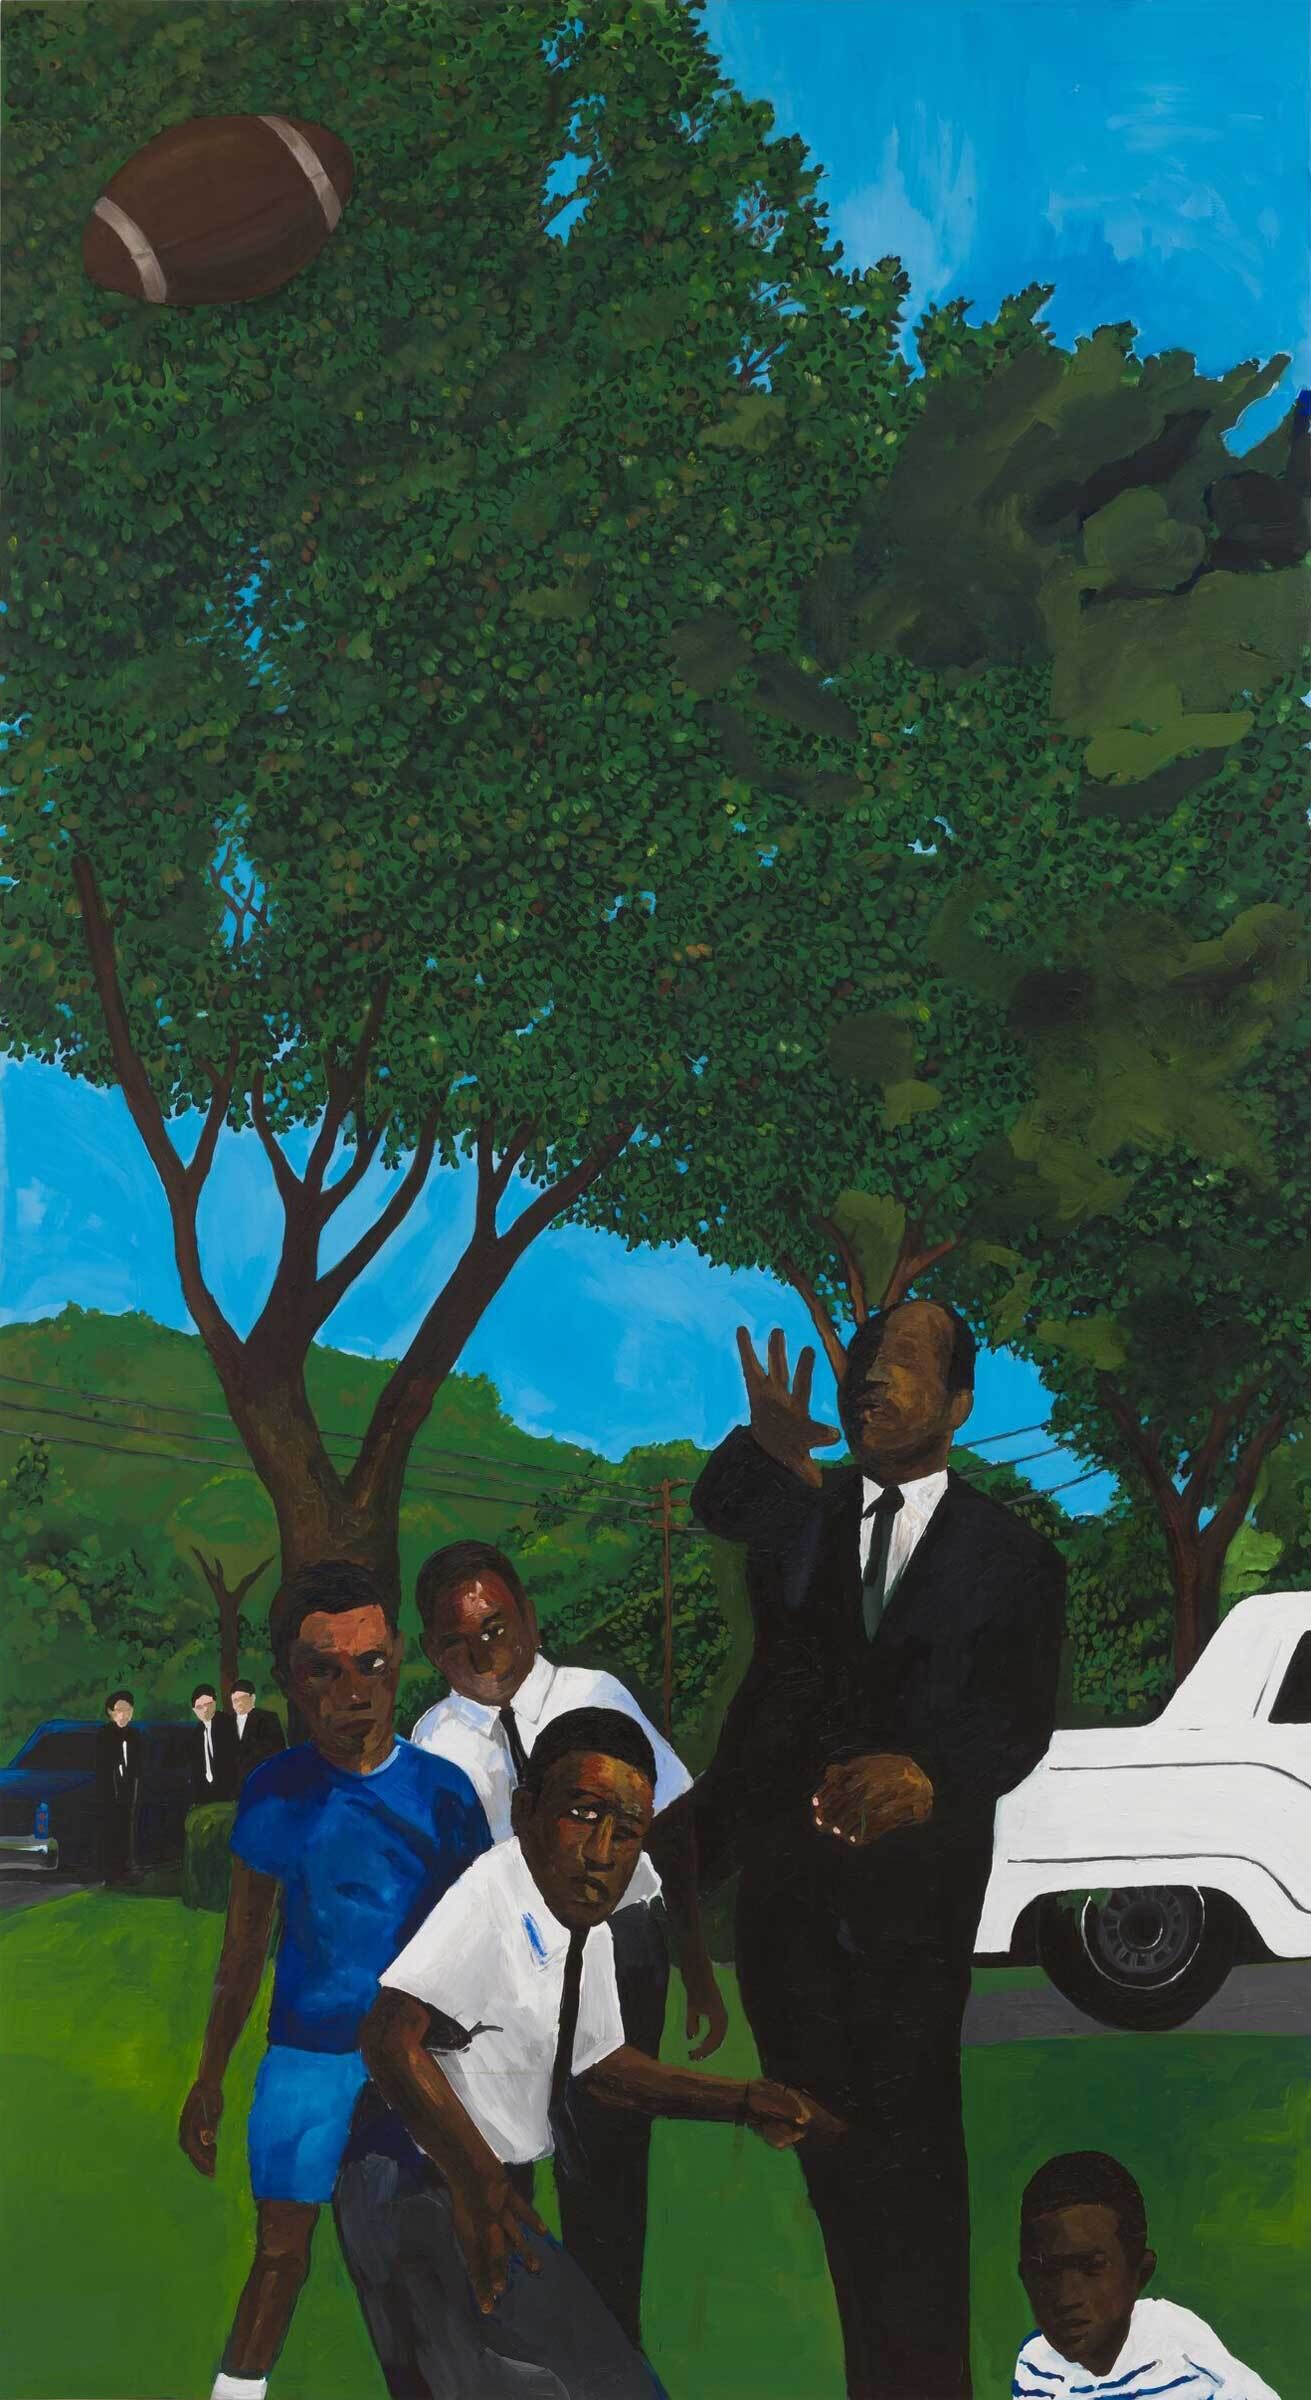 A painting of Martin Luther King Jr. and four children standing on a grassy lawn. Trees and a driveway are visible behind them. King is wearing a suit and tie and has his right arm outstretched before him, appearing to have just thrown a football that is visible in the upper left corner of the painting. The children’s eyes are focused on the football. Three lighter skinned onlookers are visible in the background, on the left side of the painting.